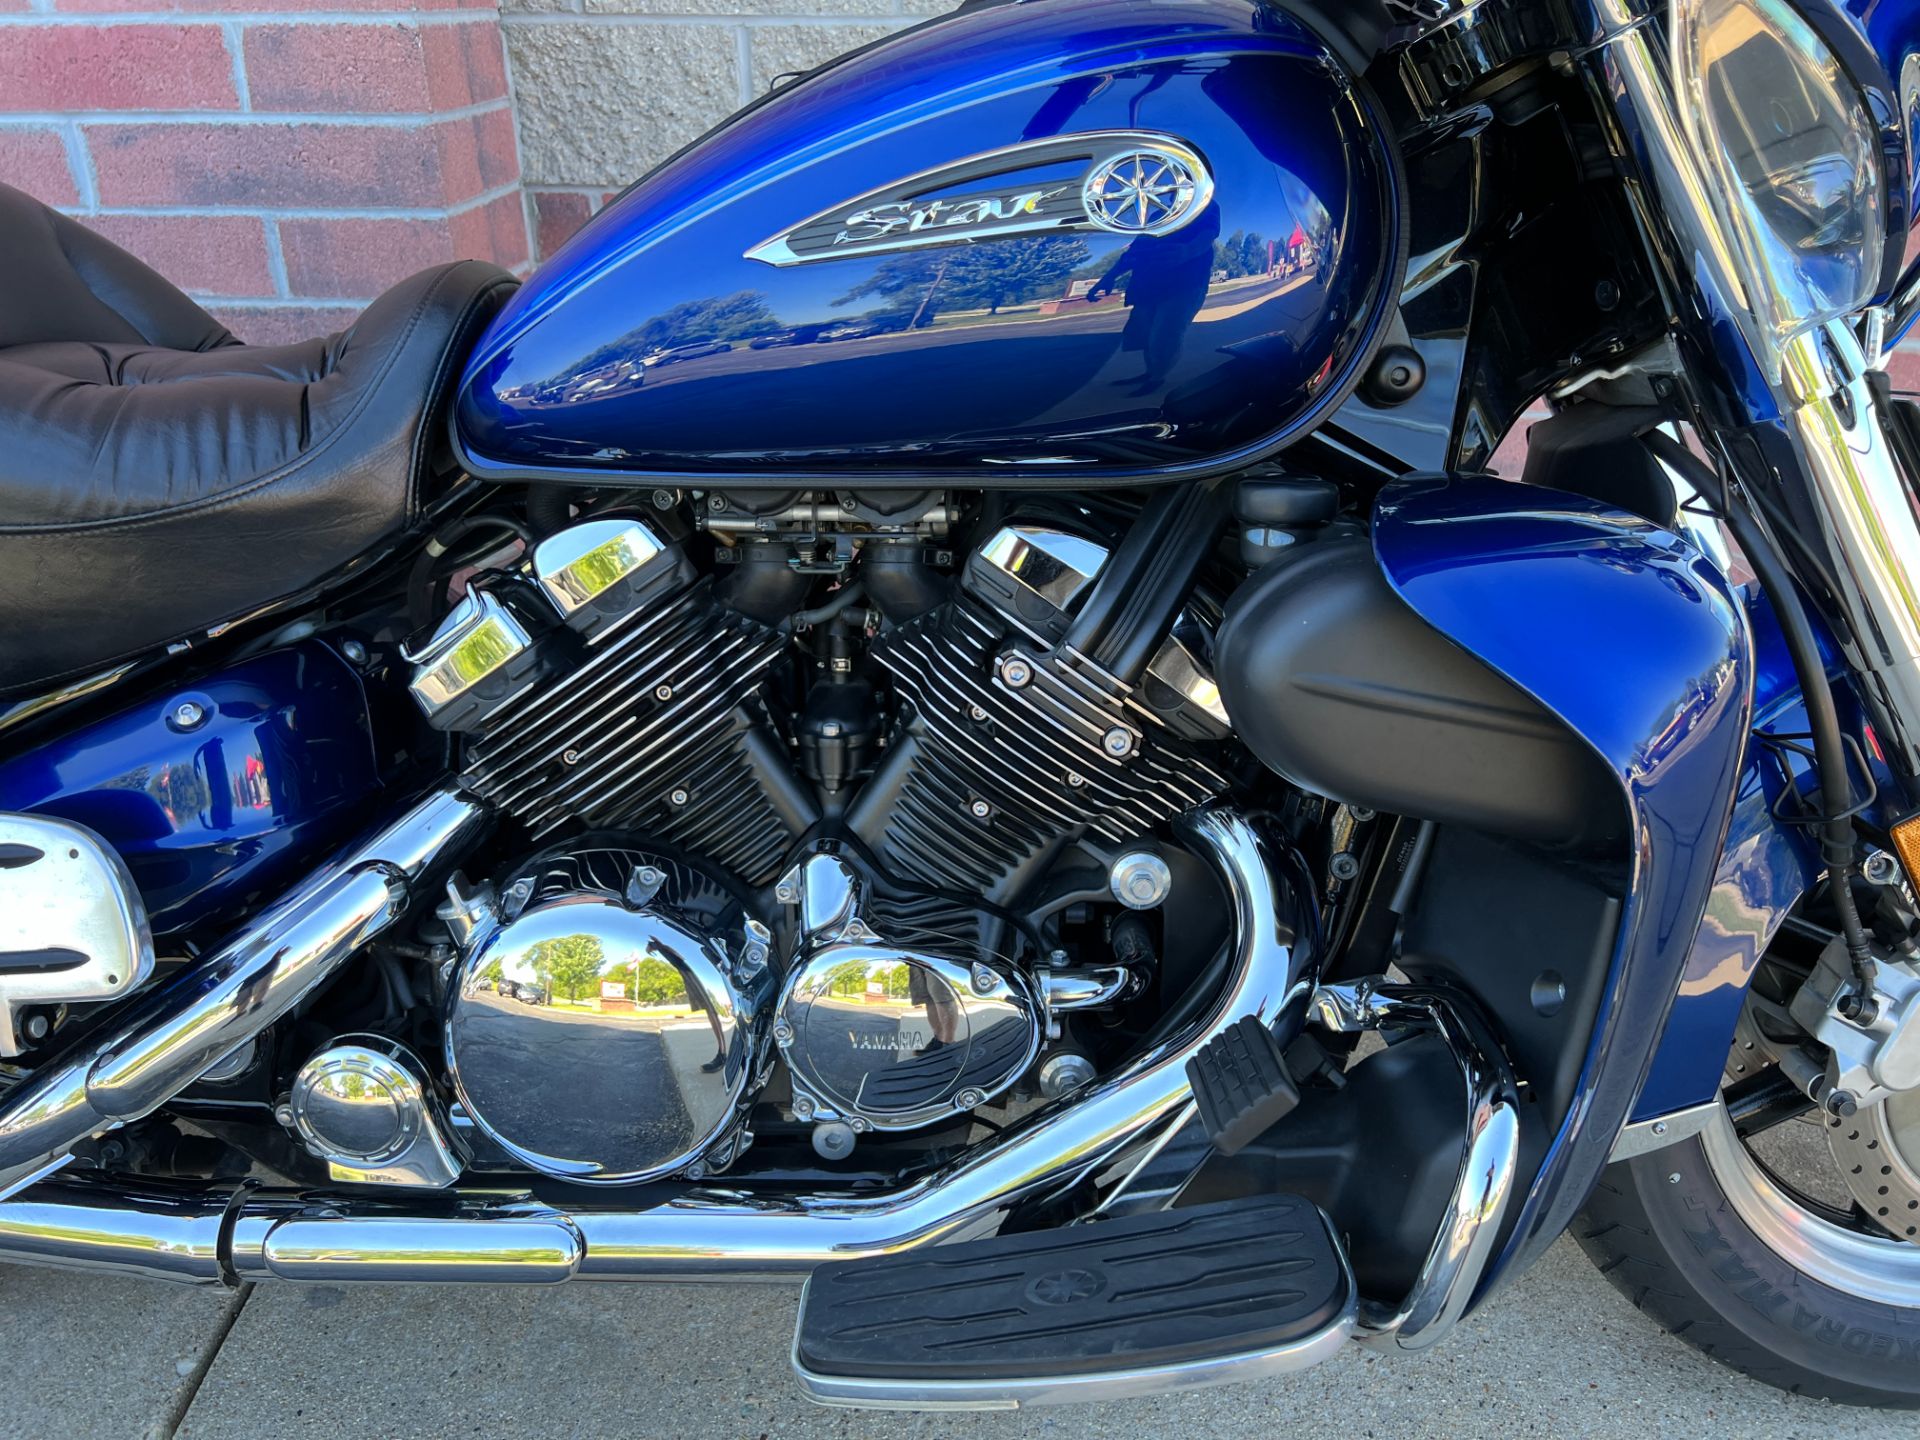 2011 Yamaha Royal Star Venture S in Muskego, Wisconsin - Photo 5